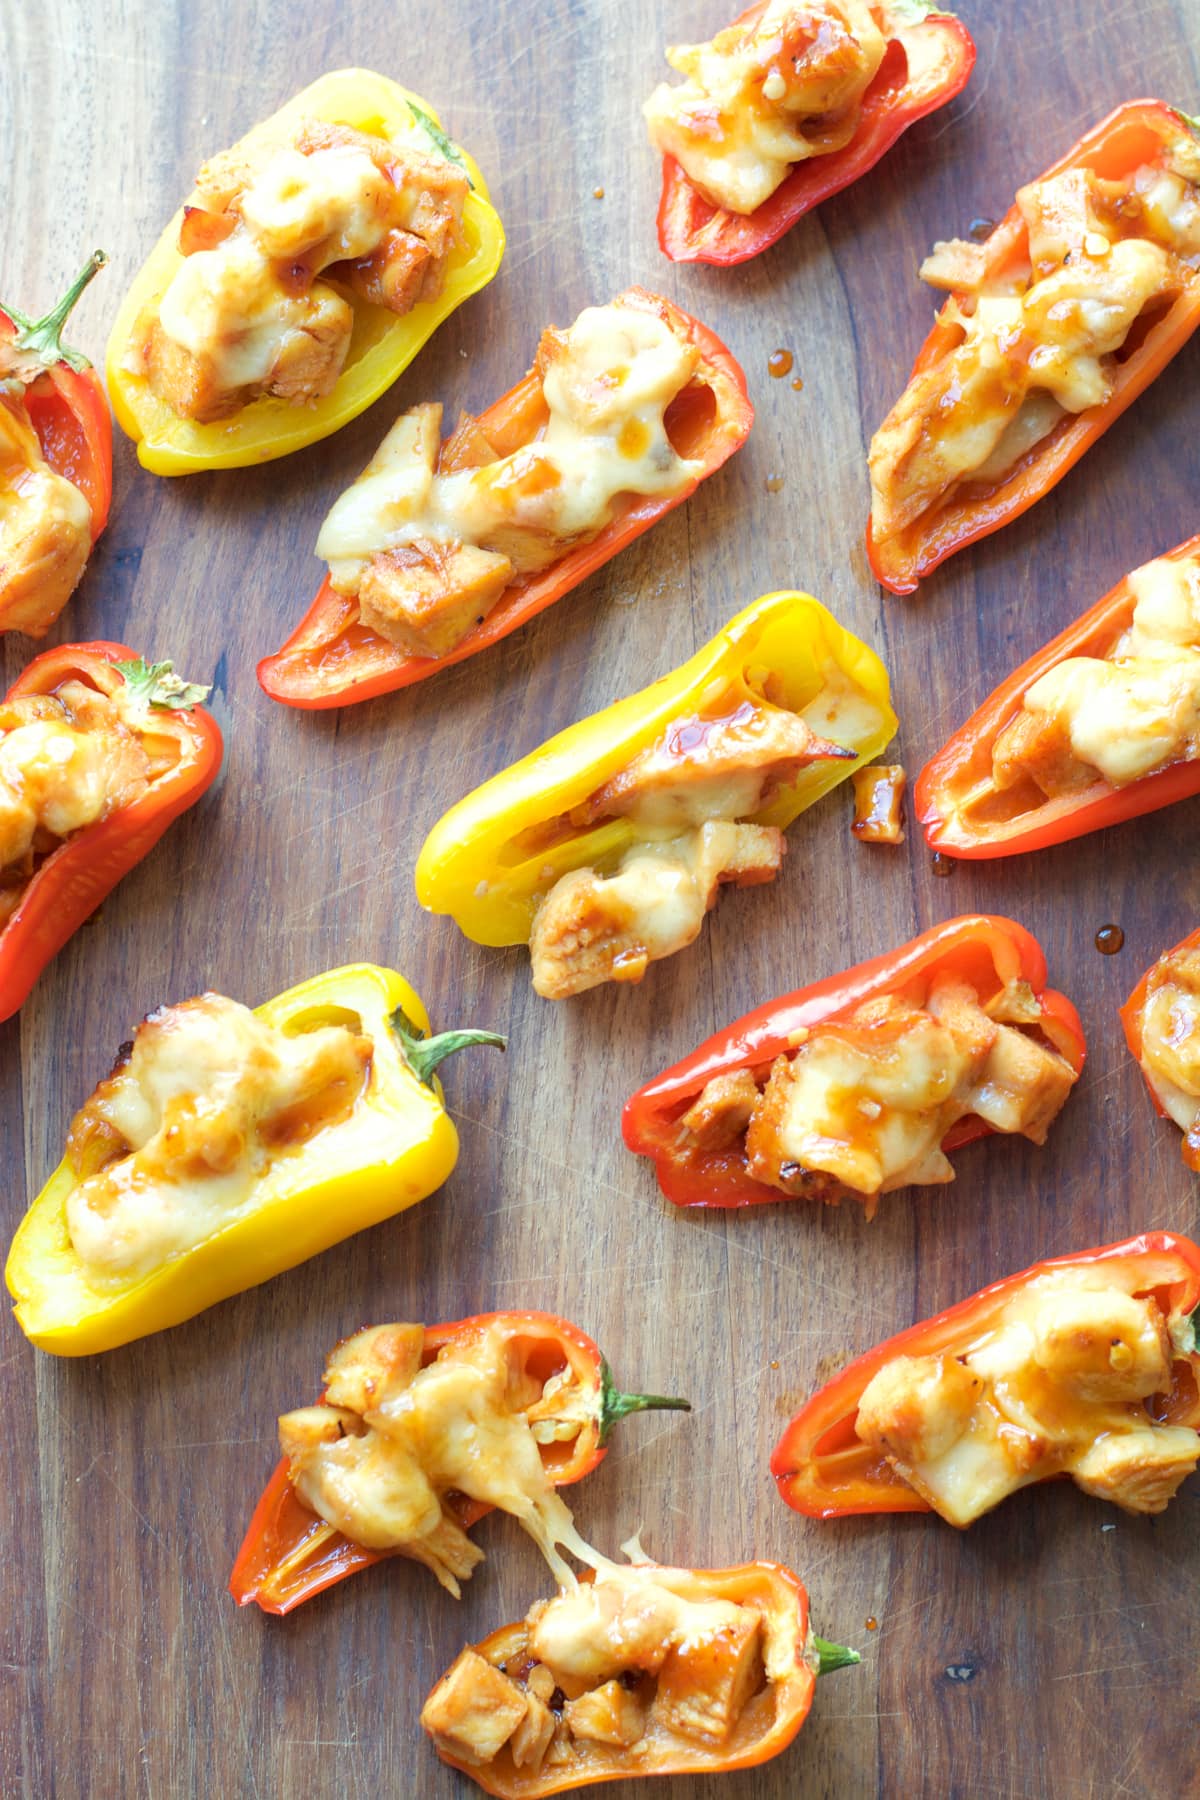 This simple six ingredient dish is perfect for Summer entertaining! Your guests will love these sweet and spicy Honey Chipotle Chicken and Gouda Stuffed Sweet Peppers!